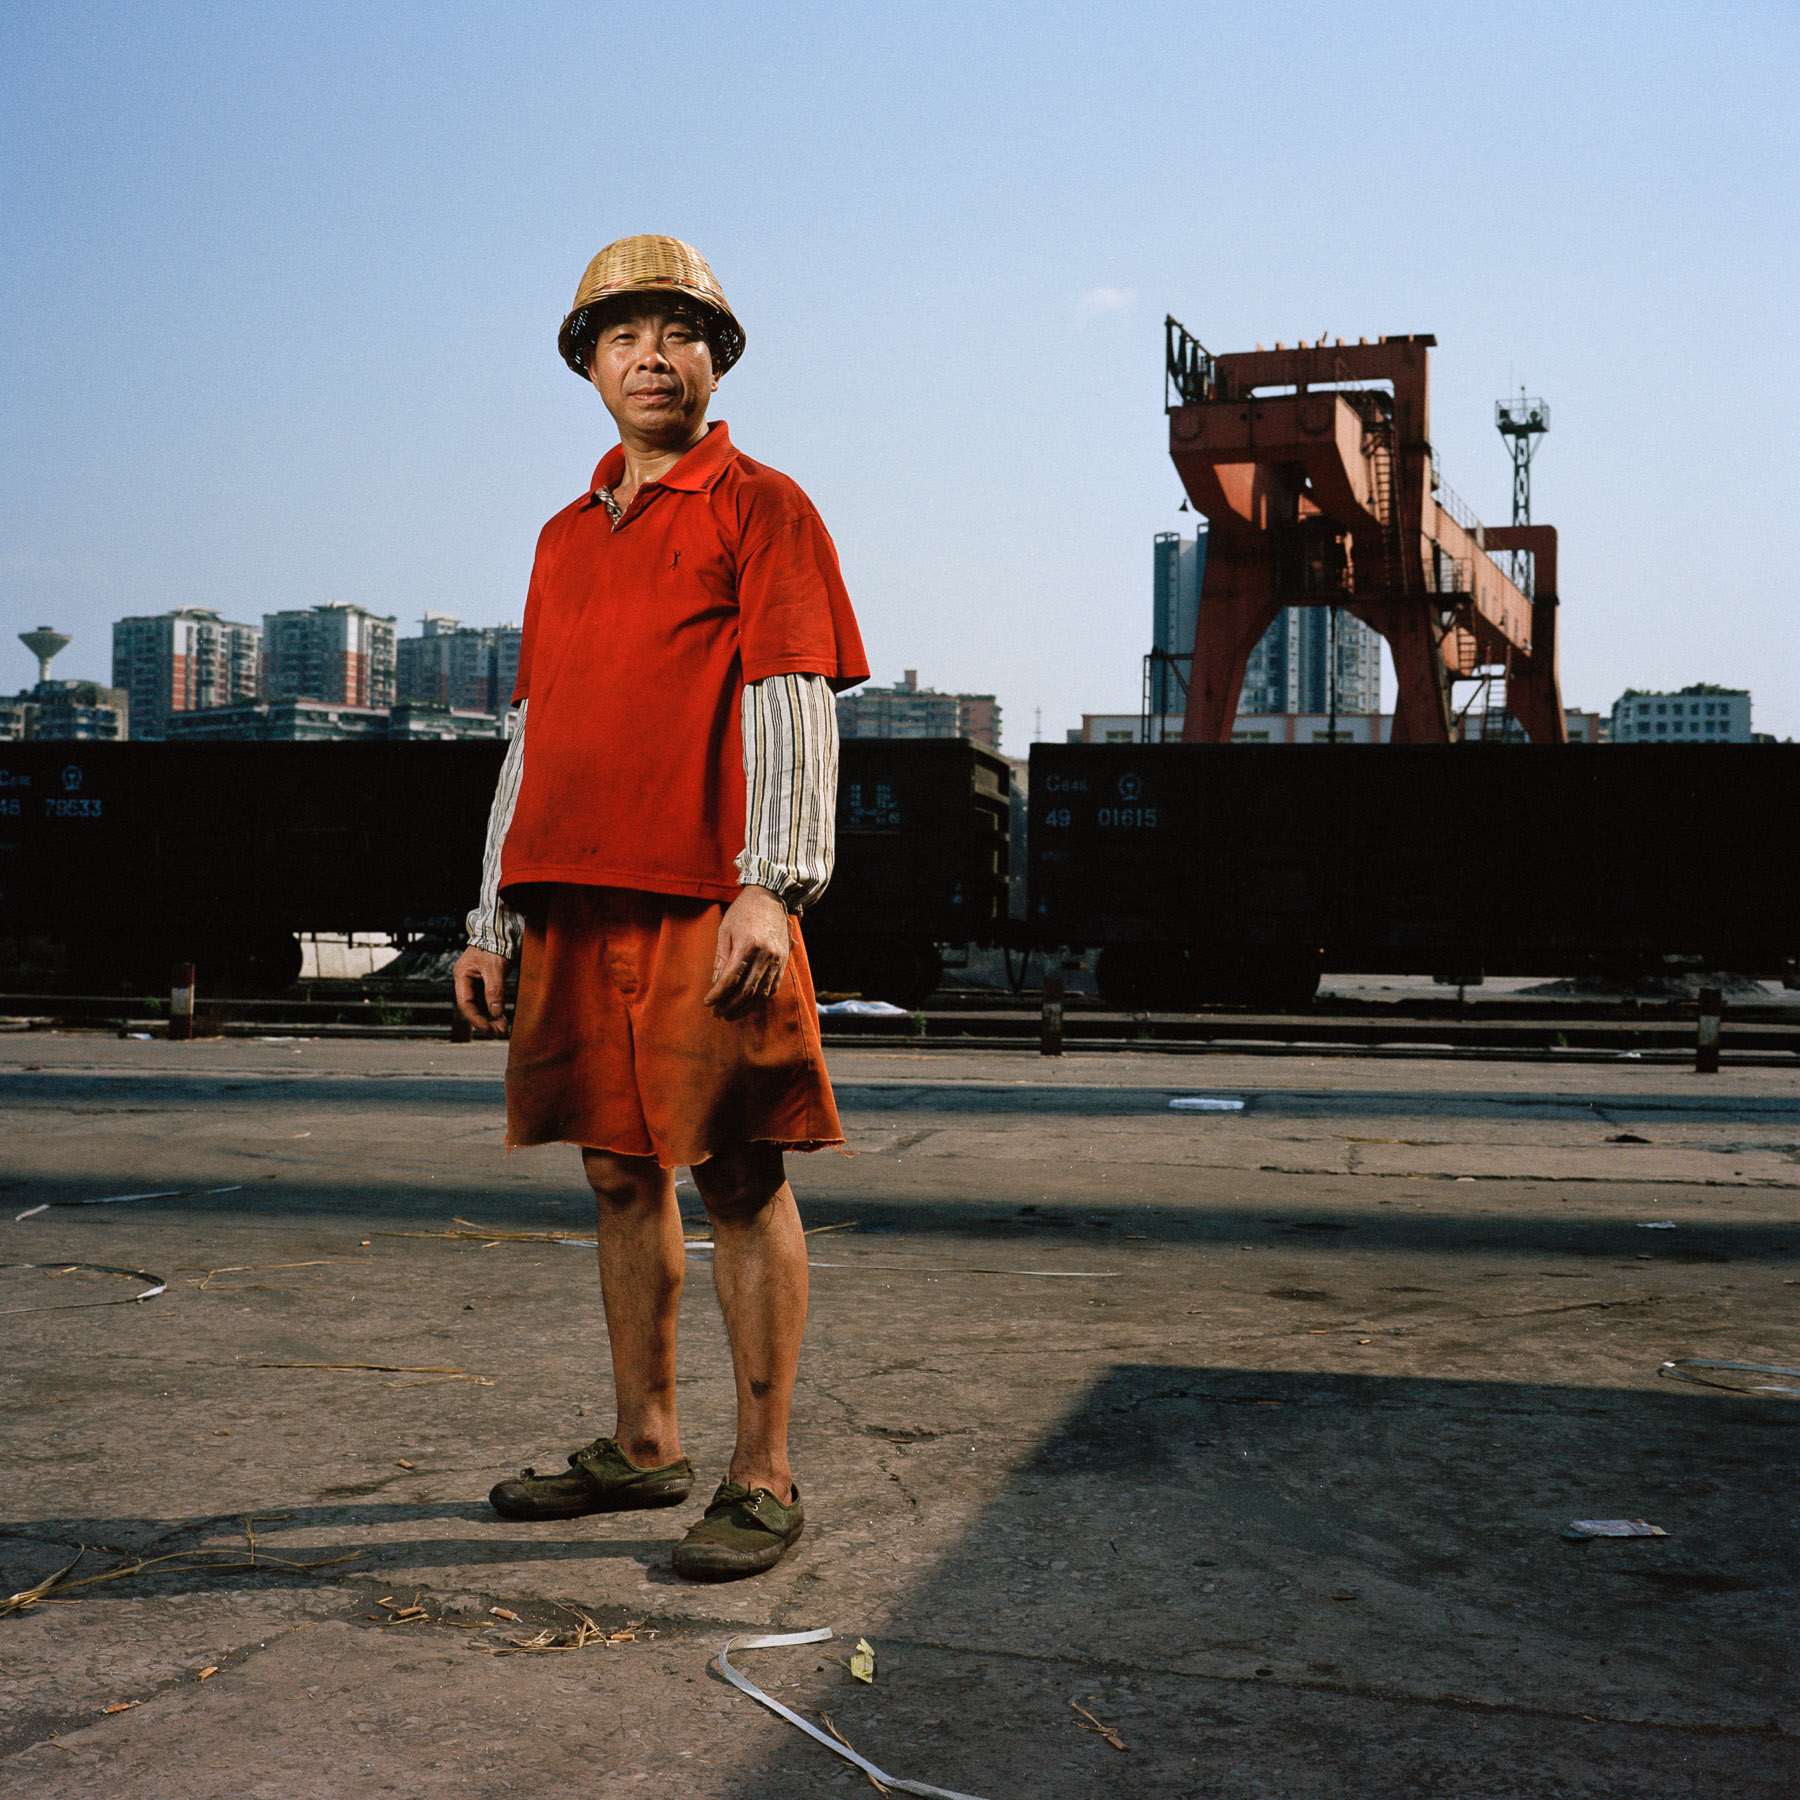  Chongqing, China. 2013. Docker Tian Yi Jun is posing for a portrait during his work shift at the Jiulongpo Port in Chongqing.
Chongqing is a major city in the Southwest of China and one of the five national central cities in the PRC. It is one of PR